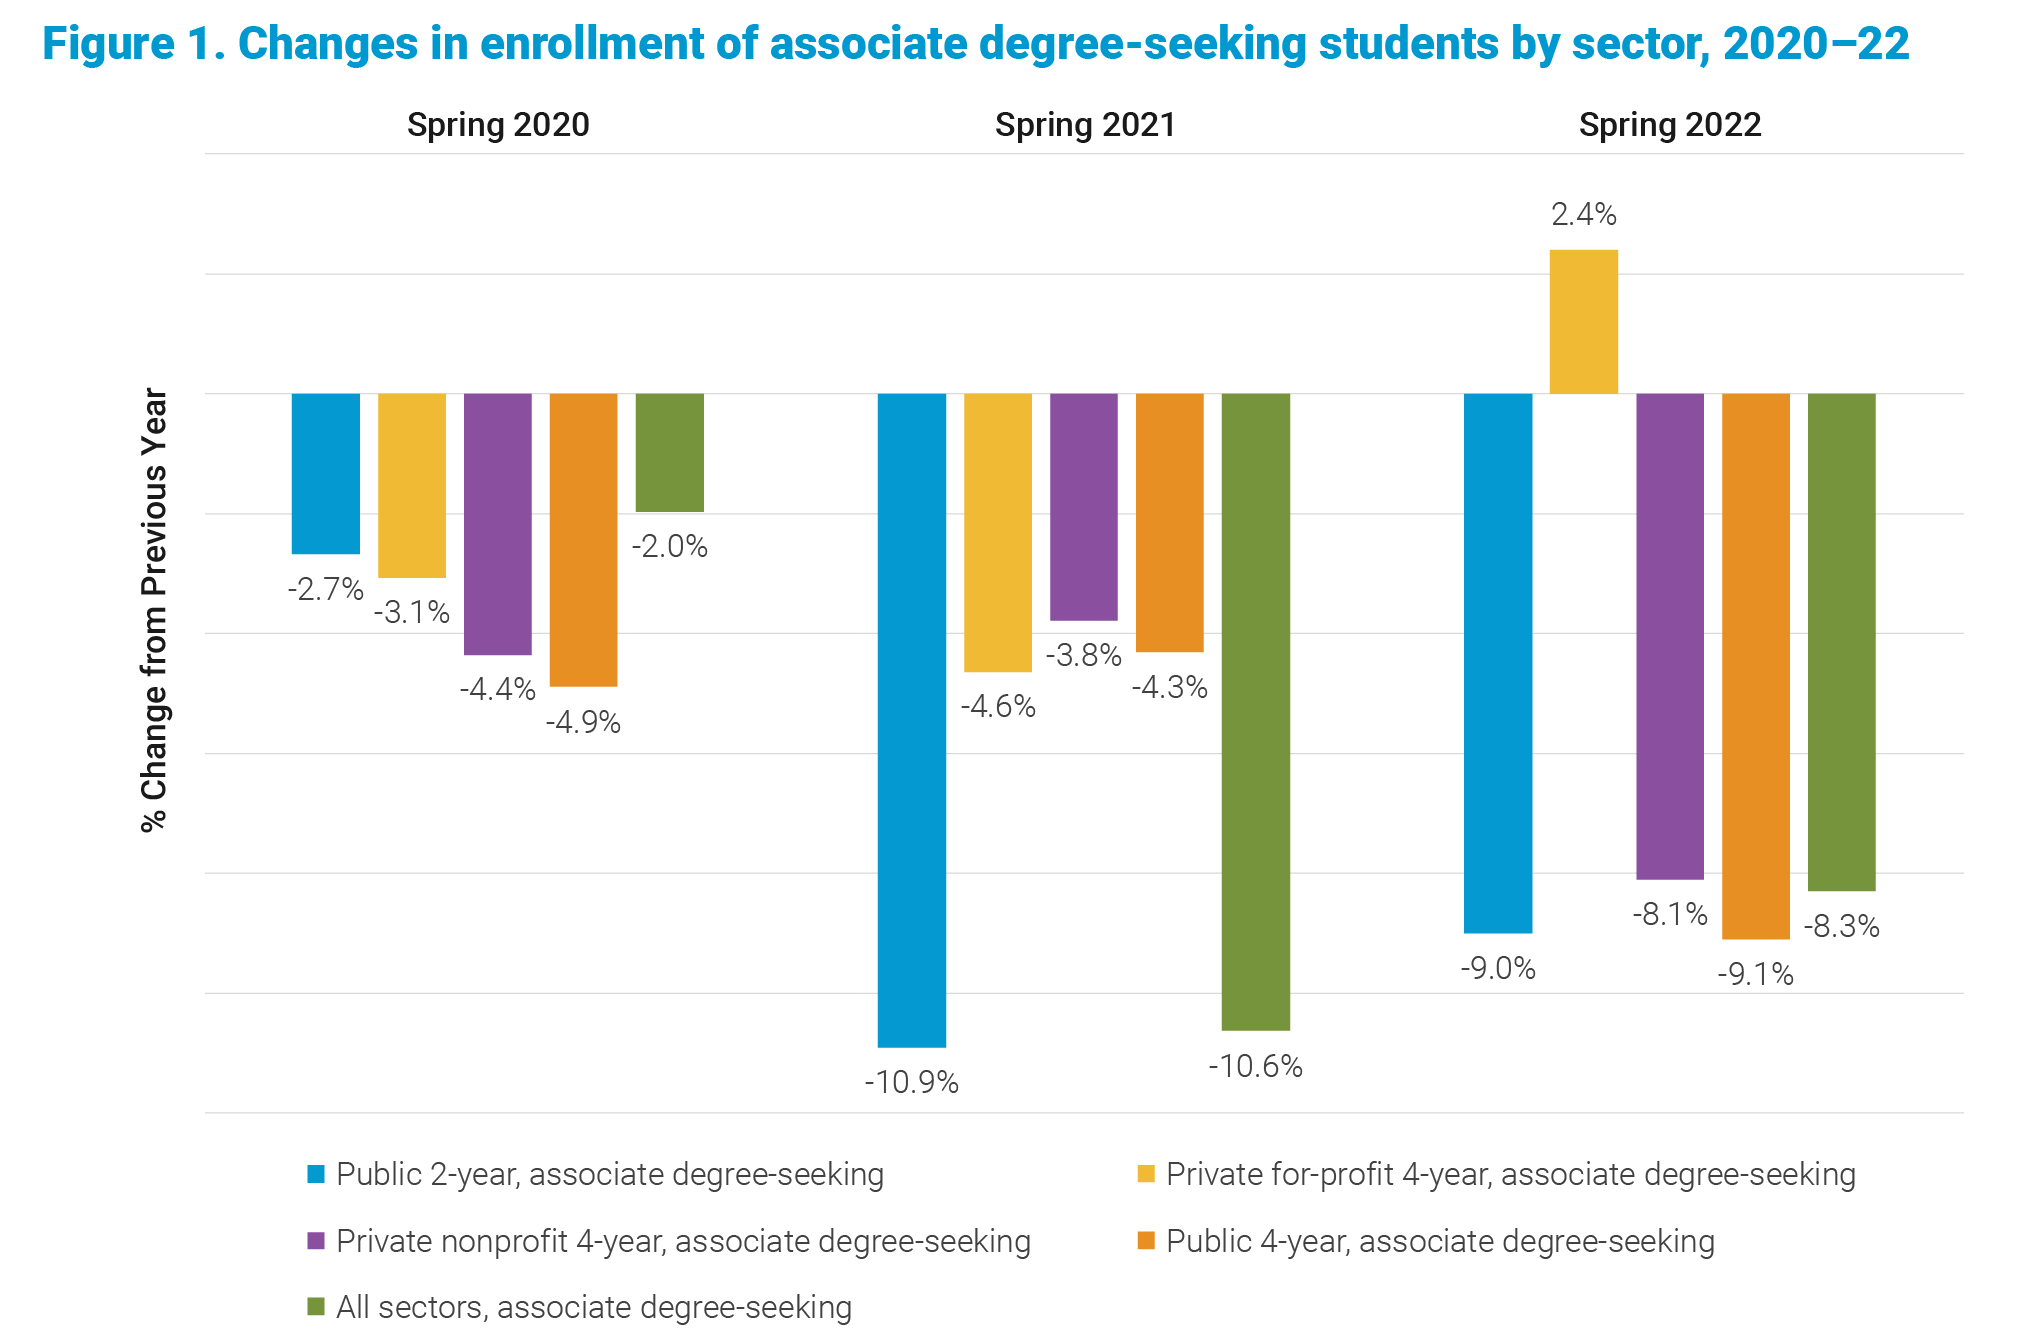 Changes in enrollment of associate degree-seeking students by sector 2020-22